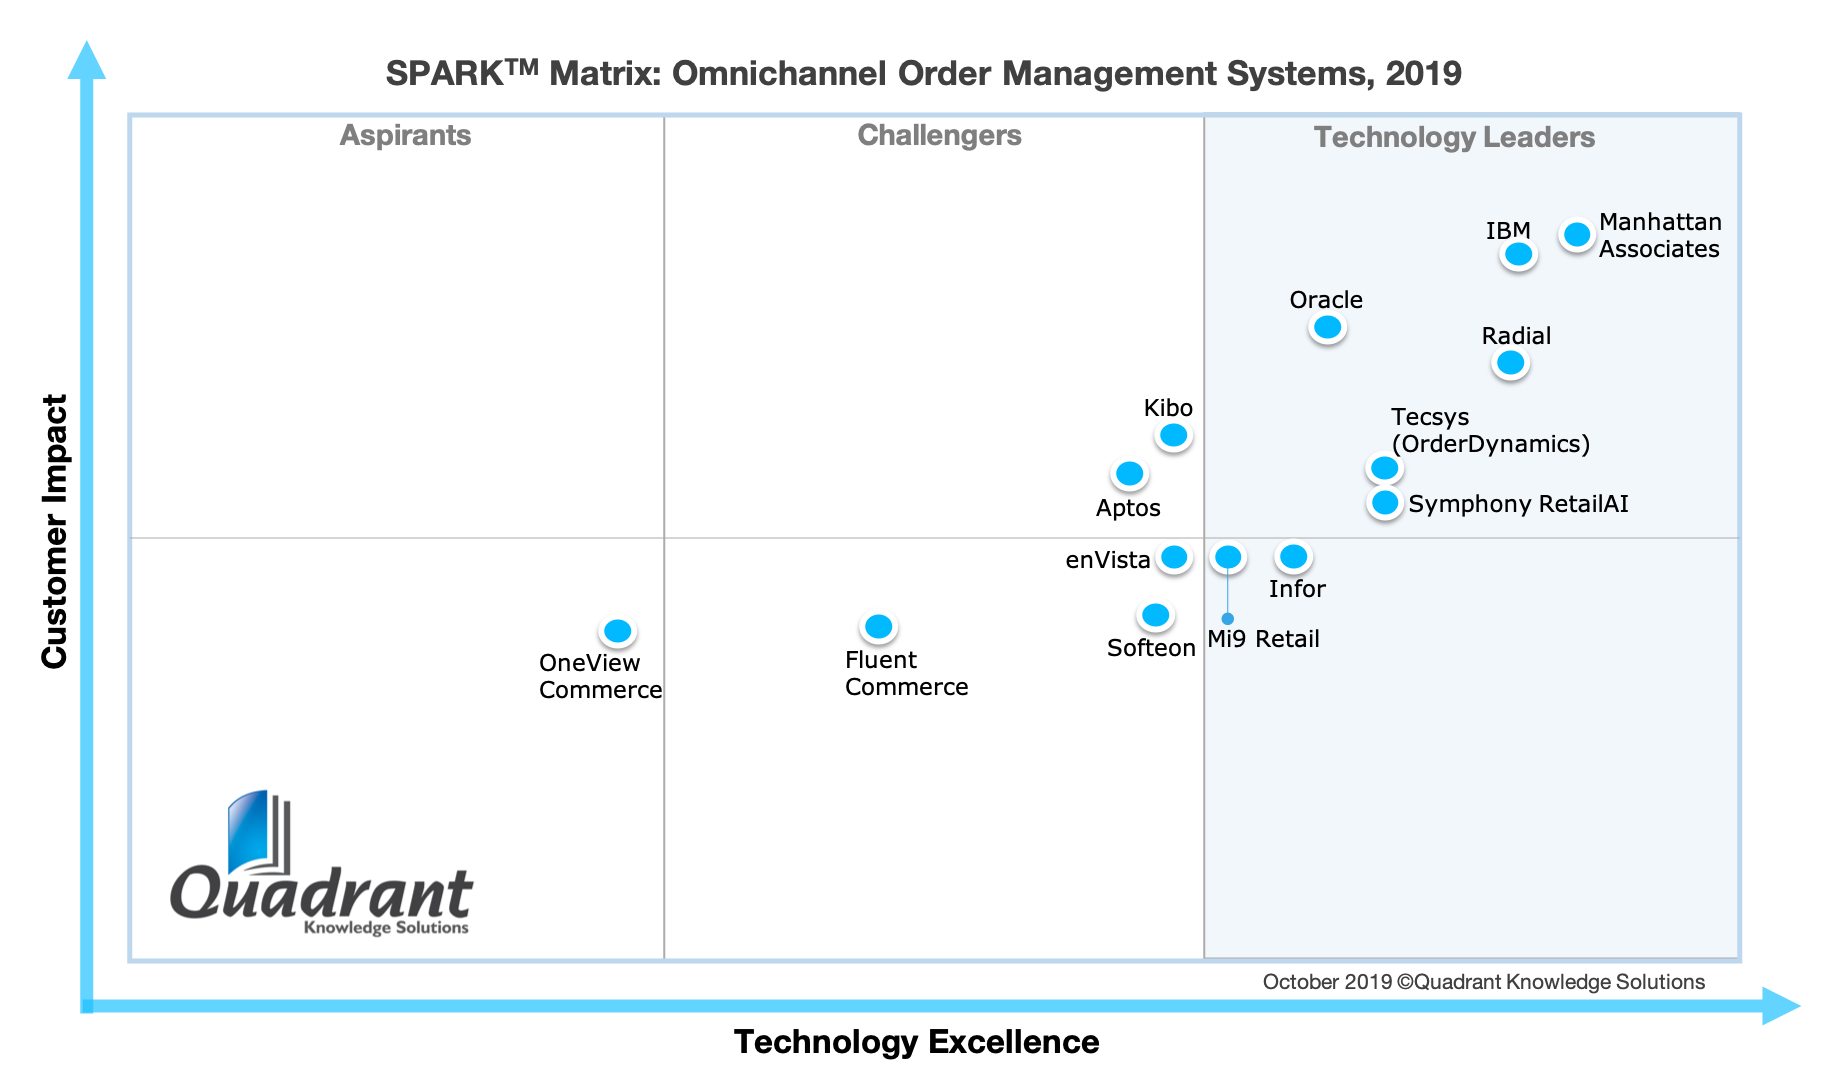 2019 SPARK Matrix of Omnichannel Order Management Systems OMS by Quadrant Knowledge Solutions 